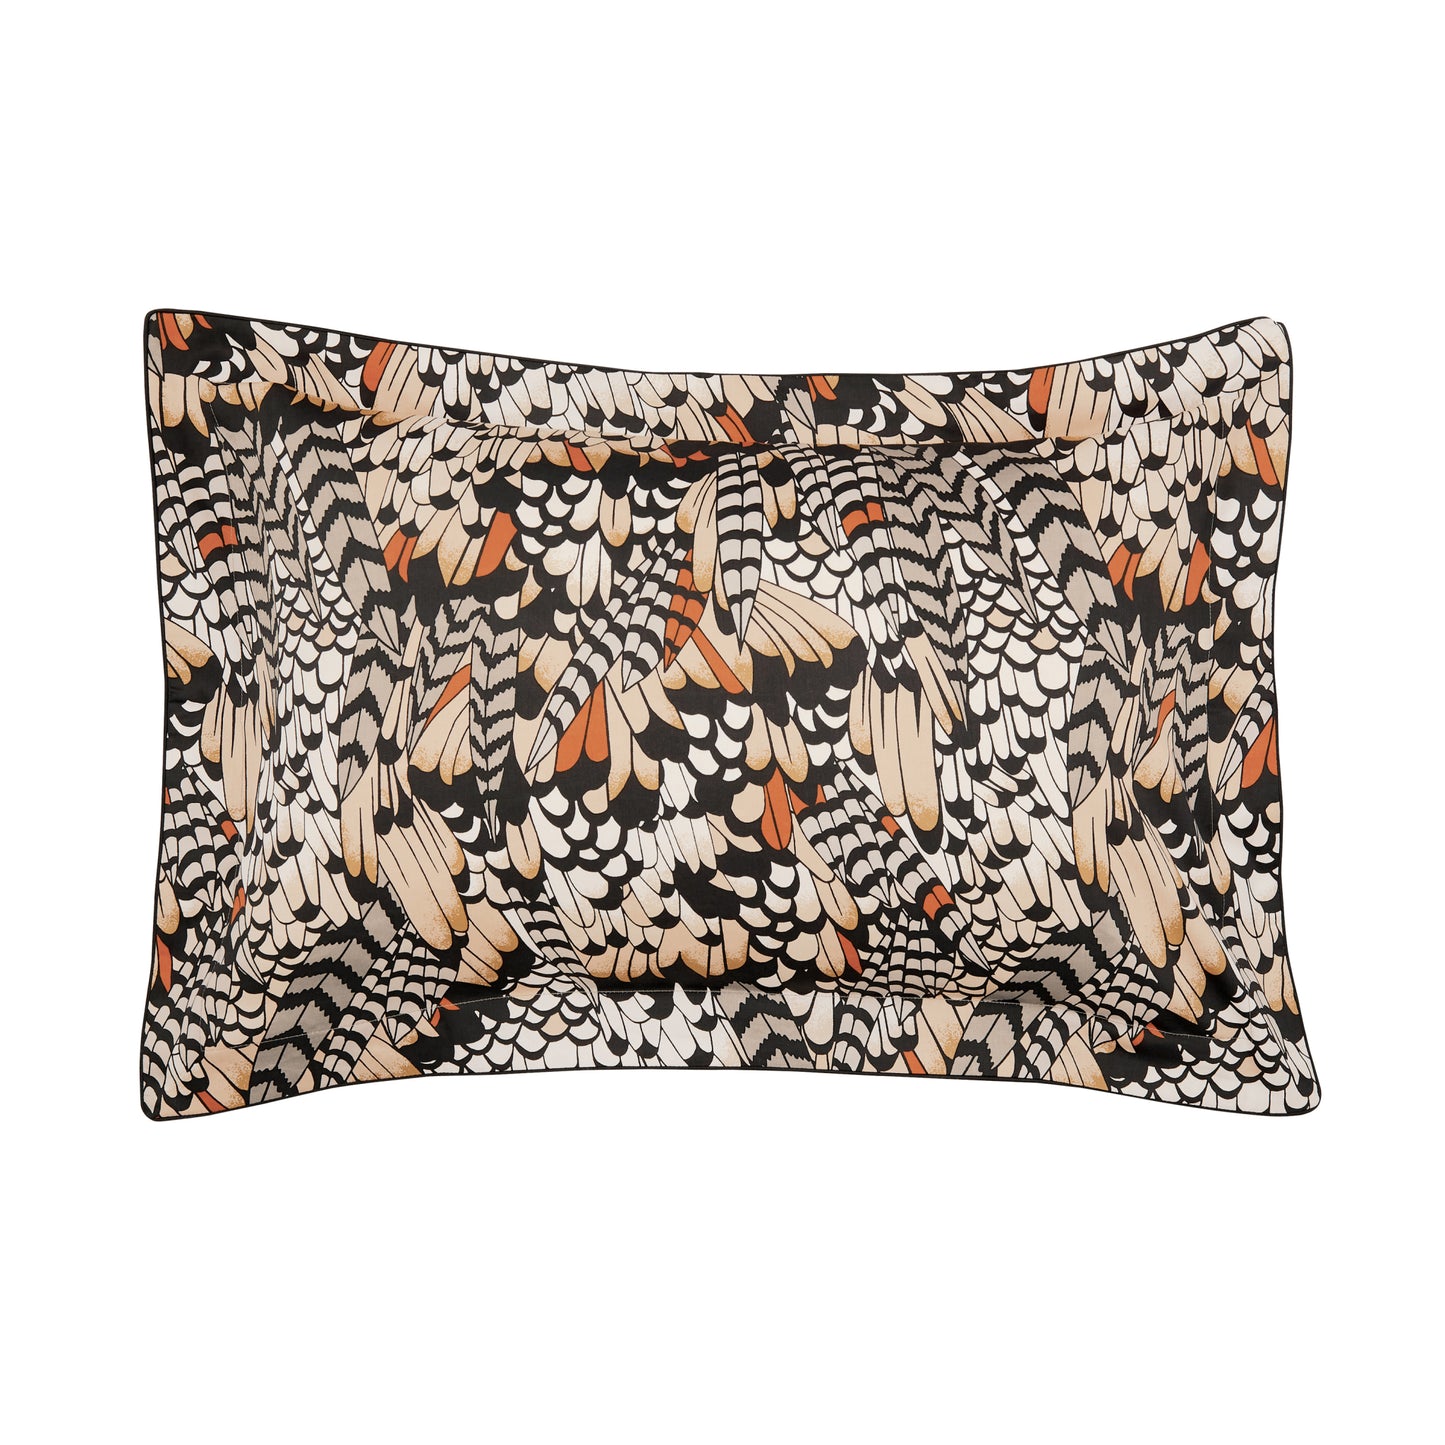 Ted Baker Feathers Comforter Set